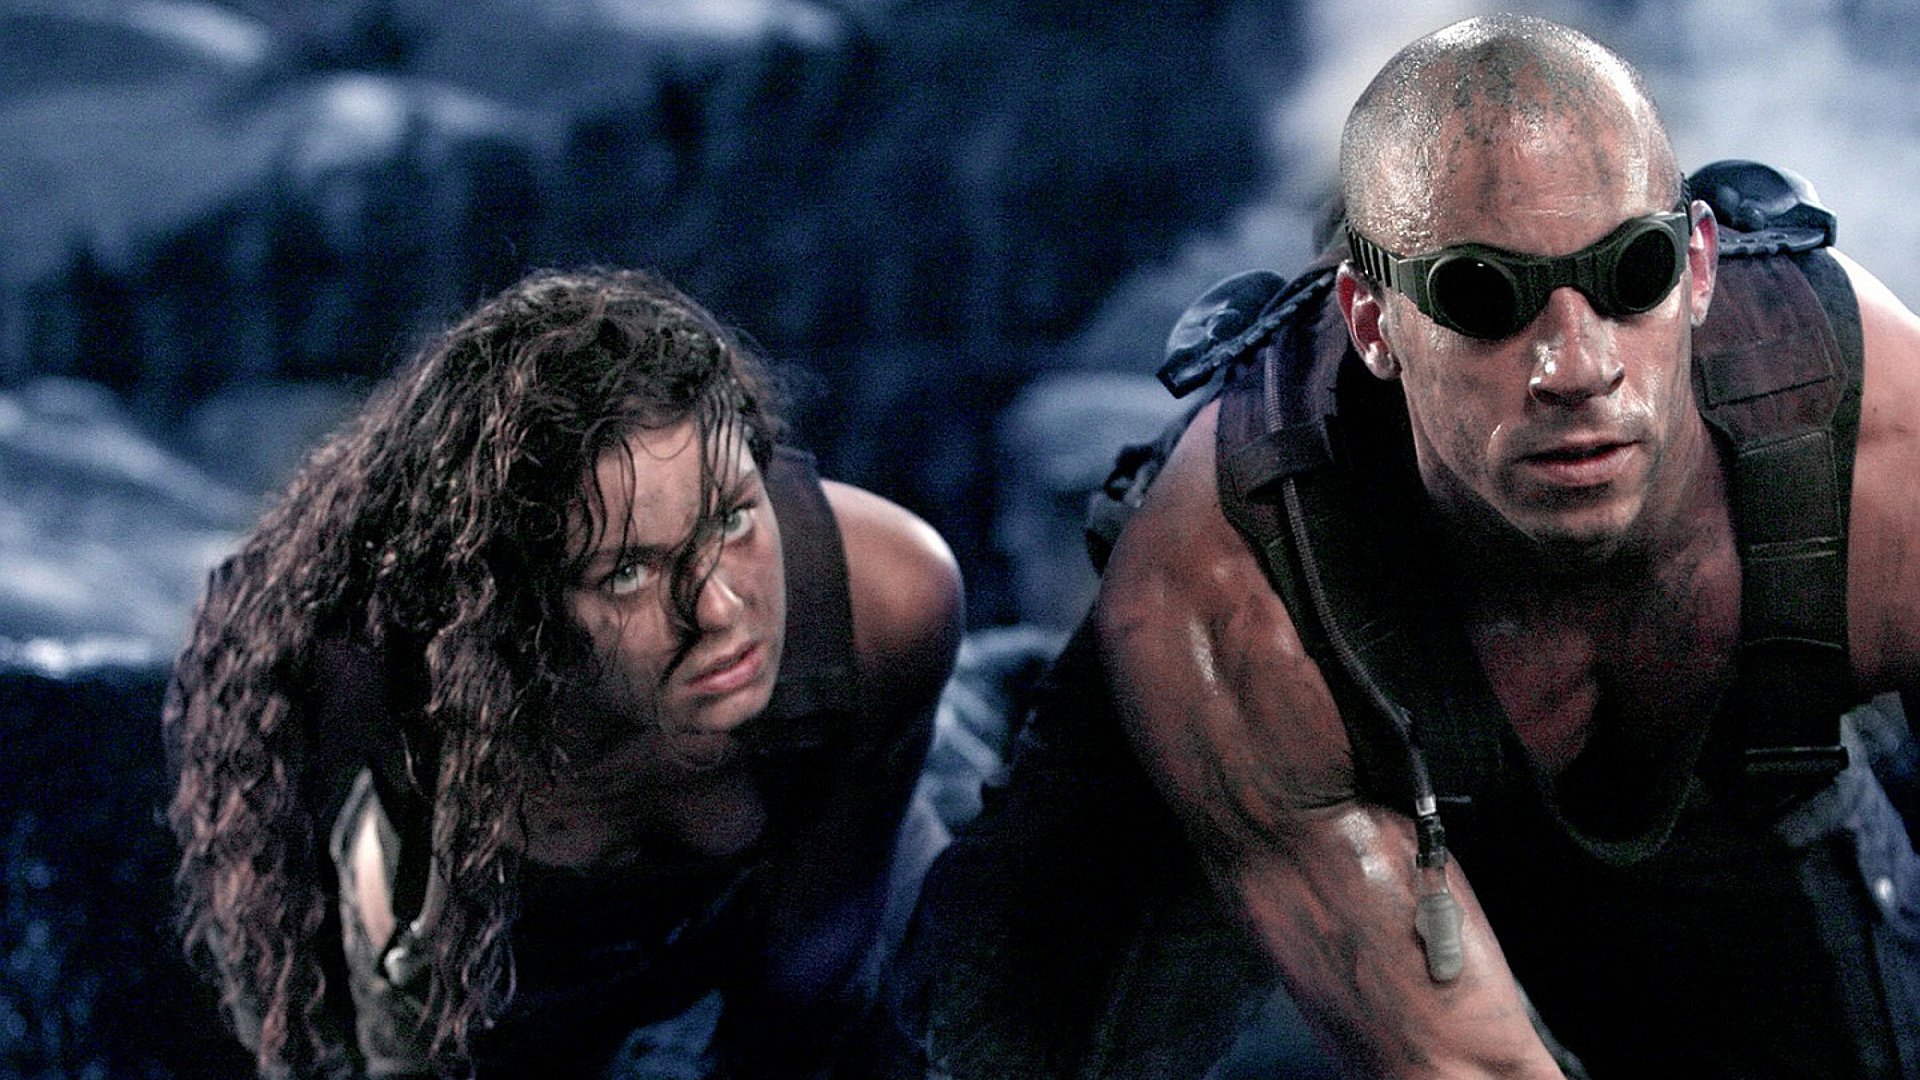 Chronicles of Riddick, The